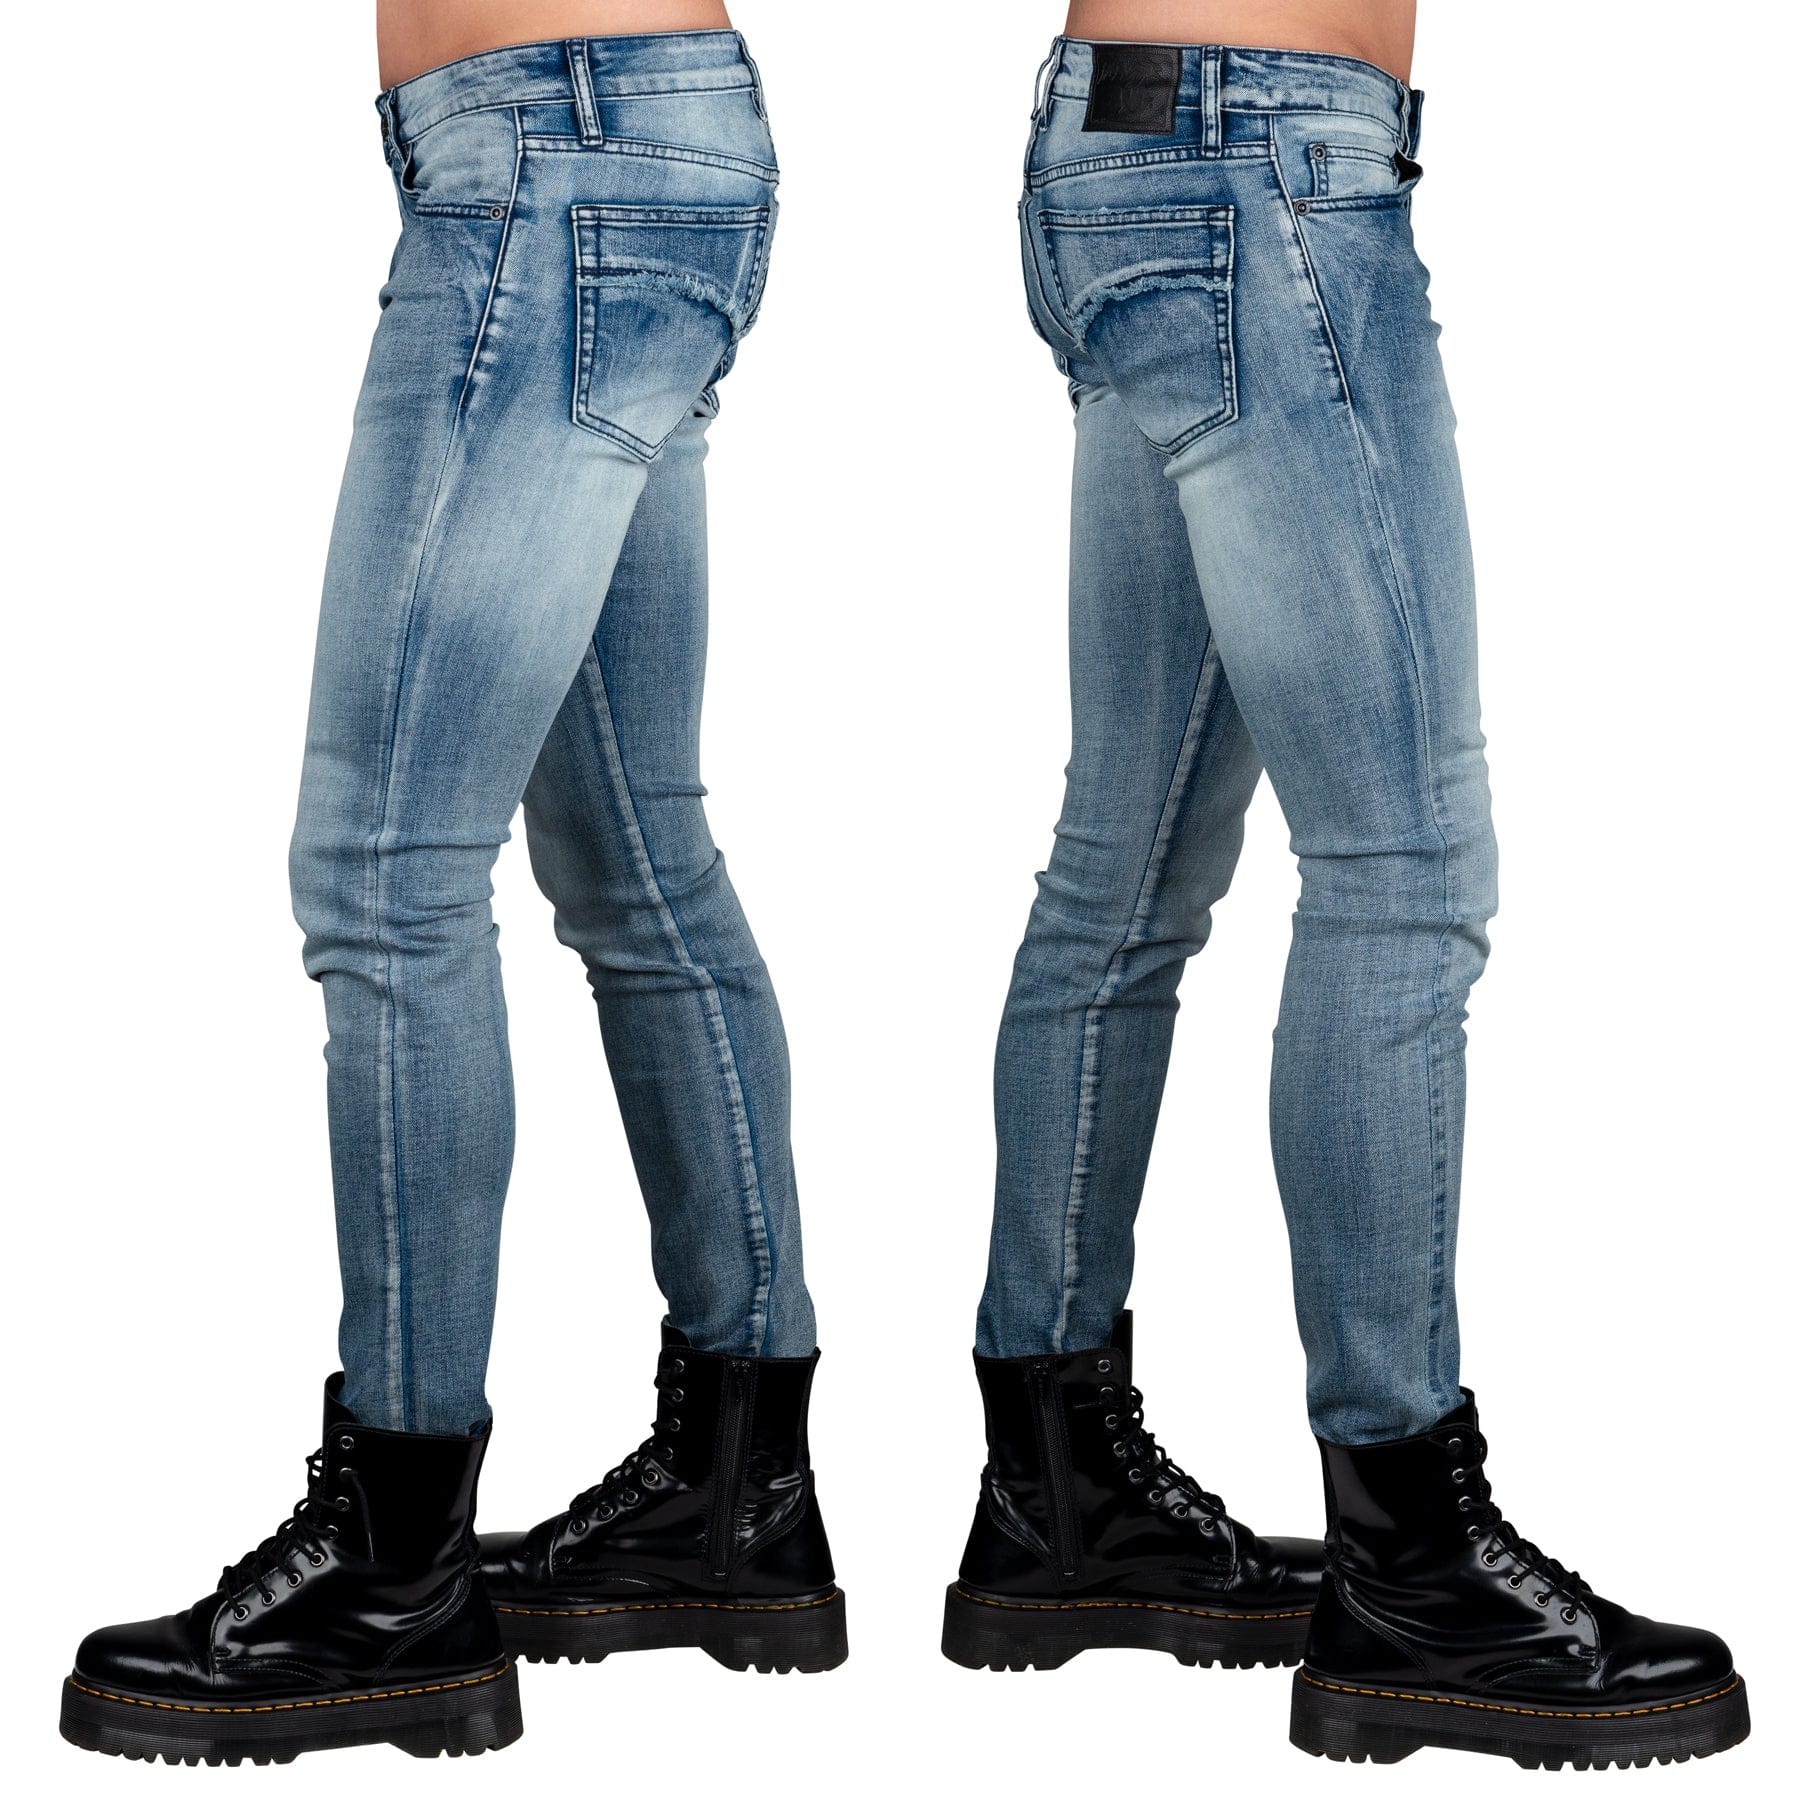 Wornstar Clothing Mens Jeans. Rampager Denim Jeans - Classic Blue